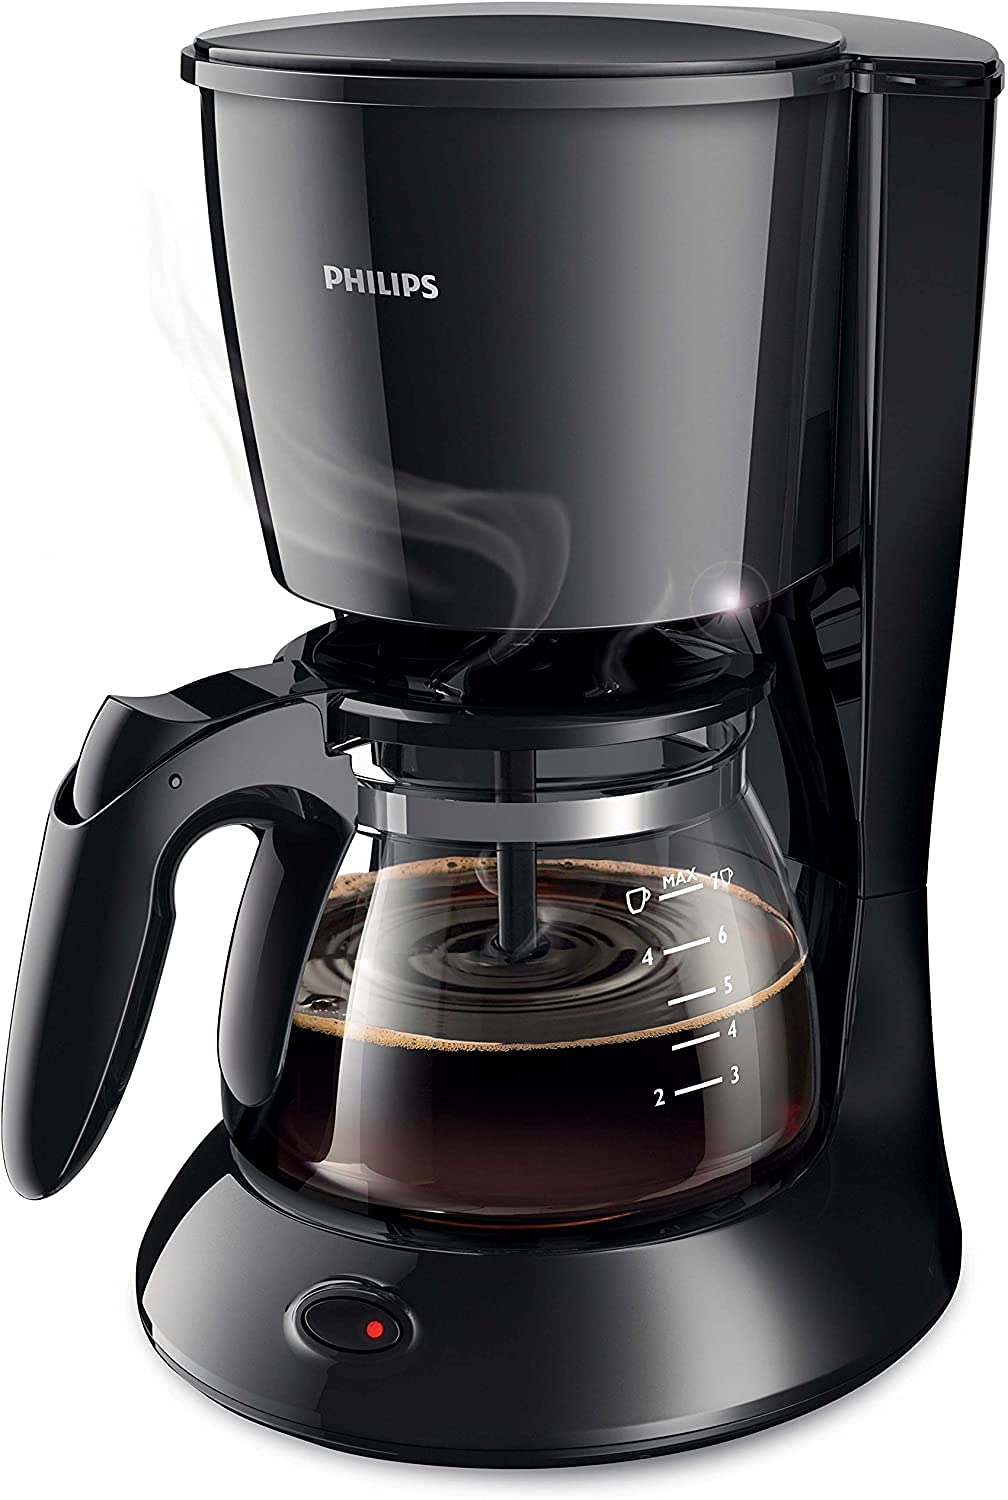 PHILIPS Drip Coffee Maker Product Review